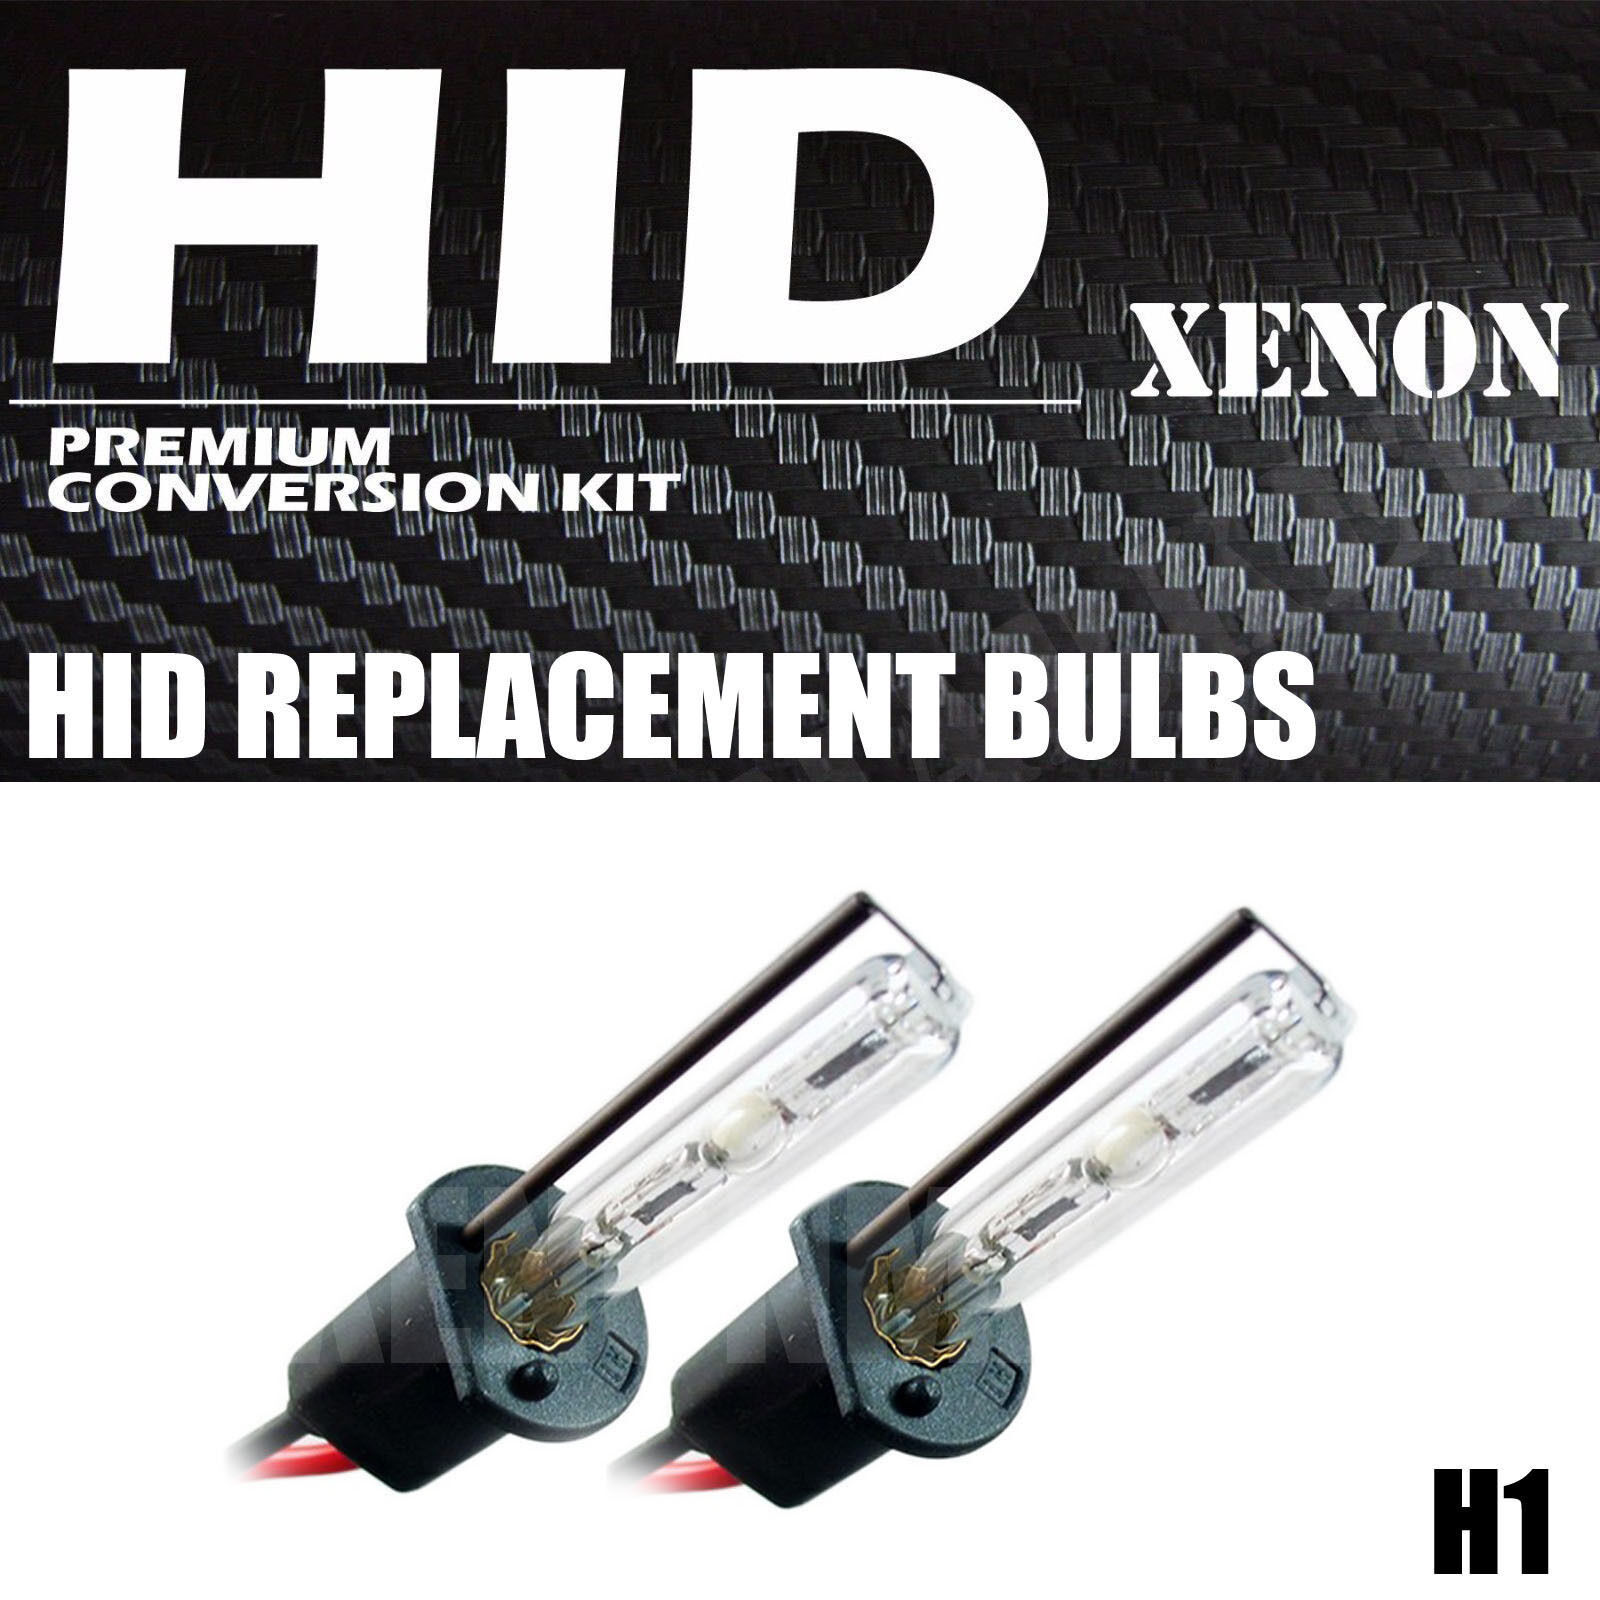 HID REPLACEMENT BULBs ALL COLORs H11 9006 9005 H4 H7 9007 H13 H10 880 H3 H1 5202